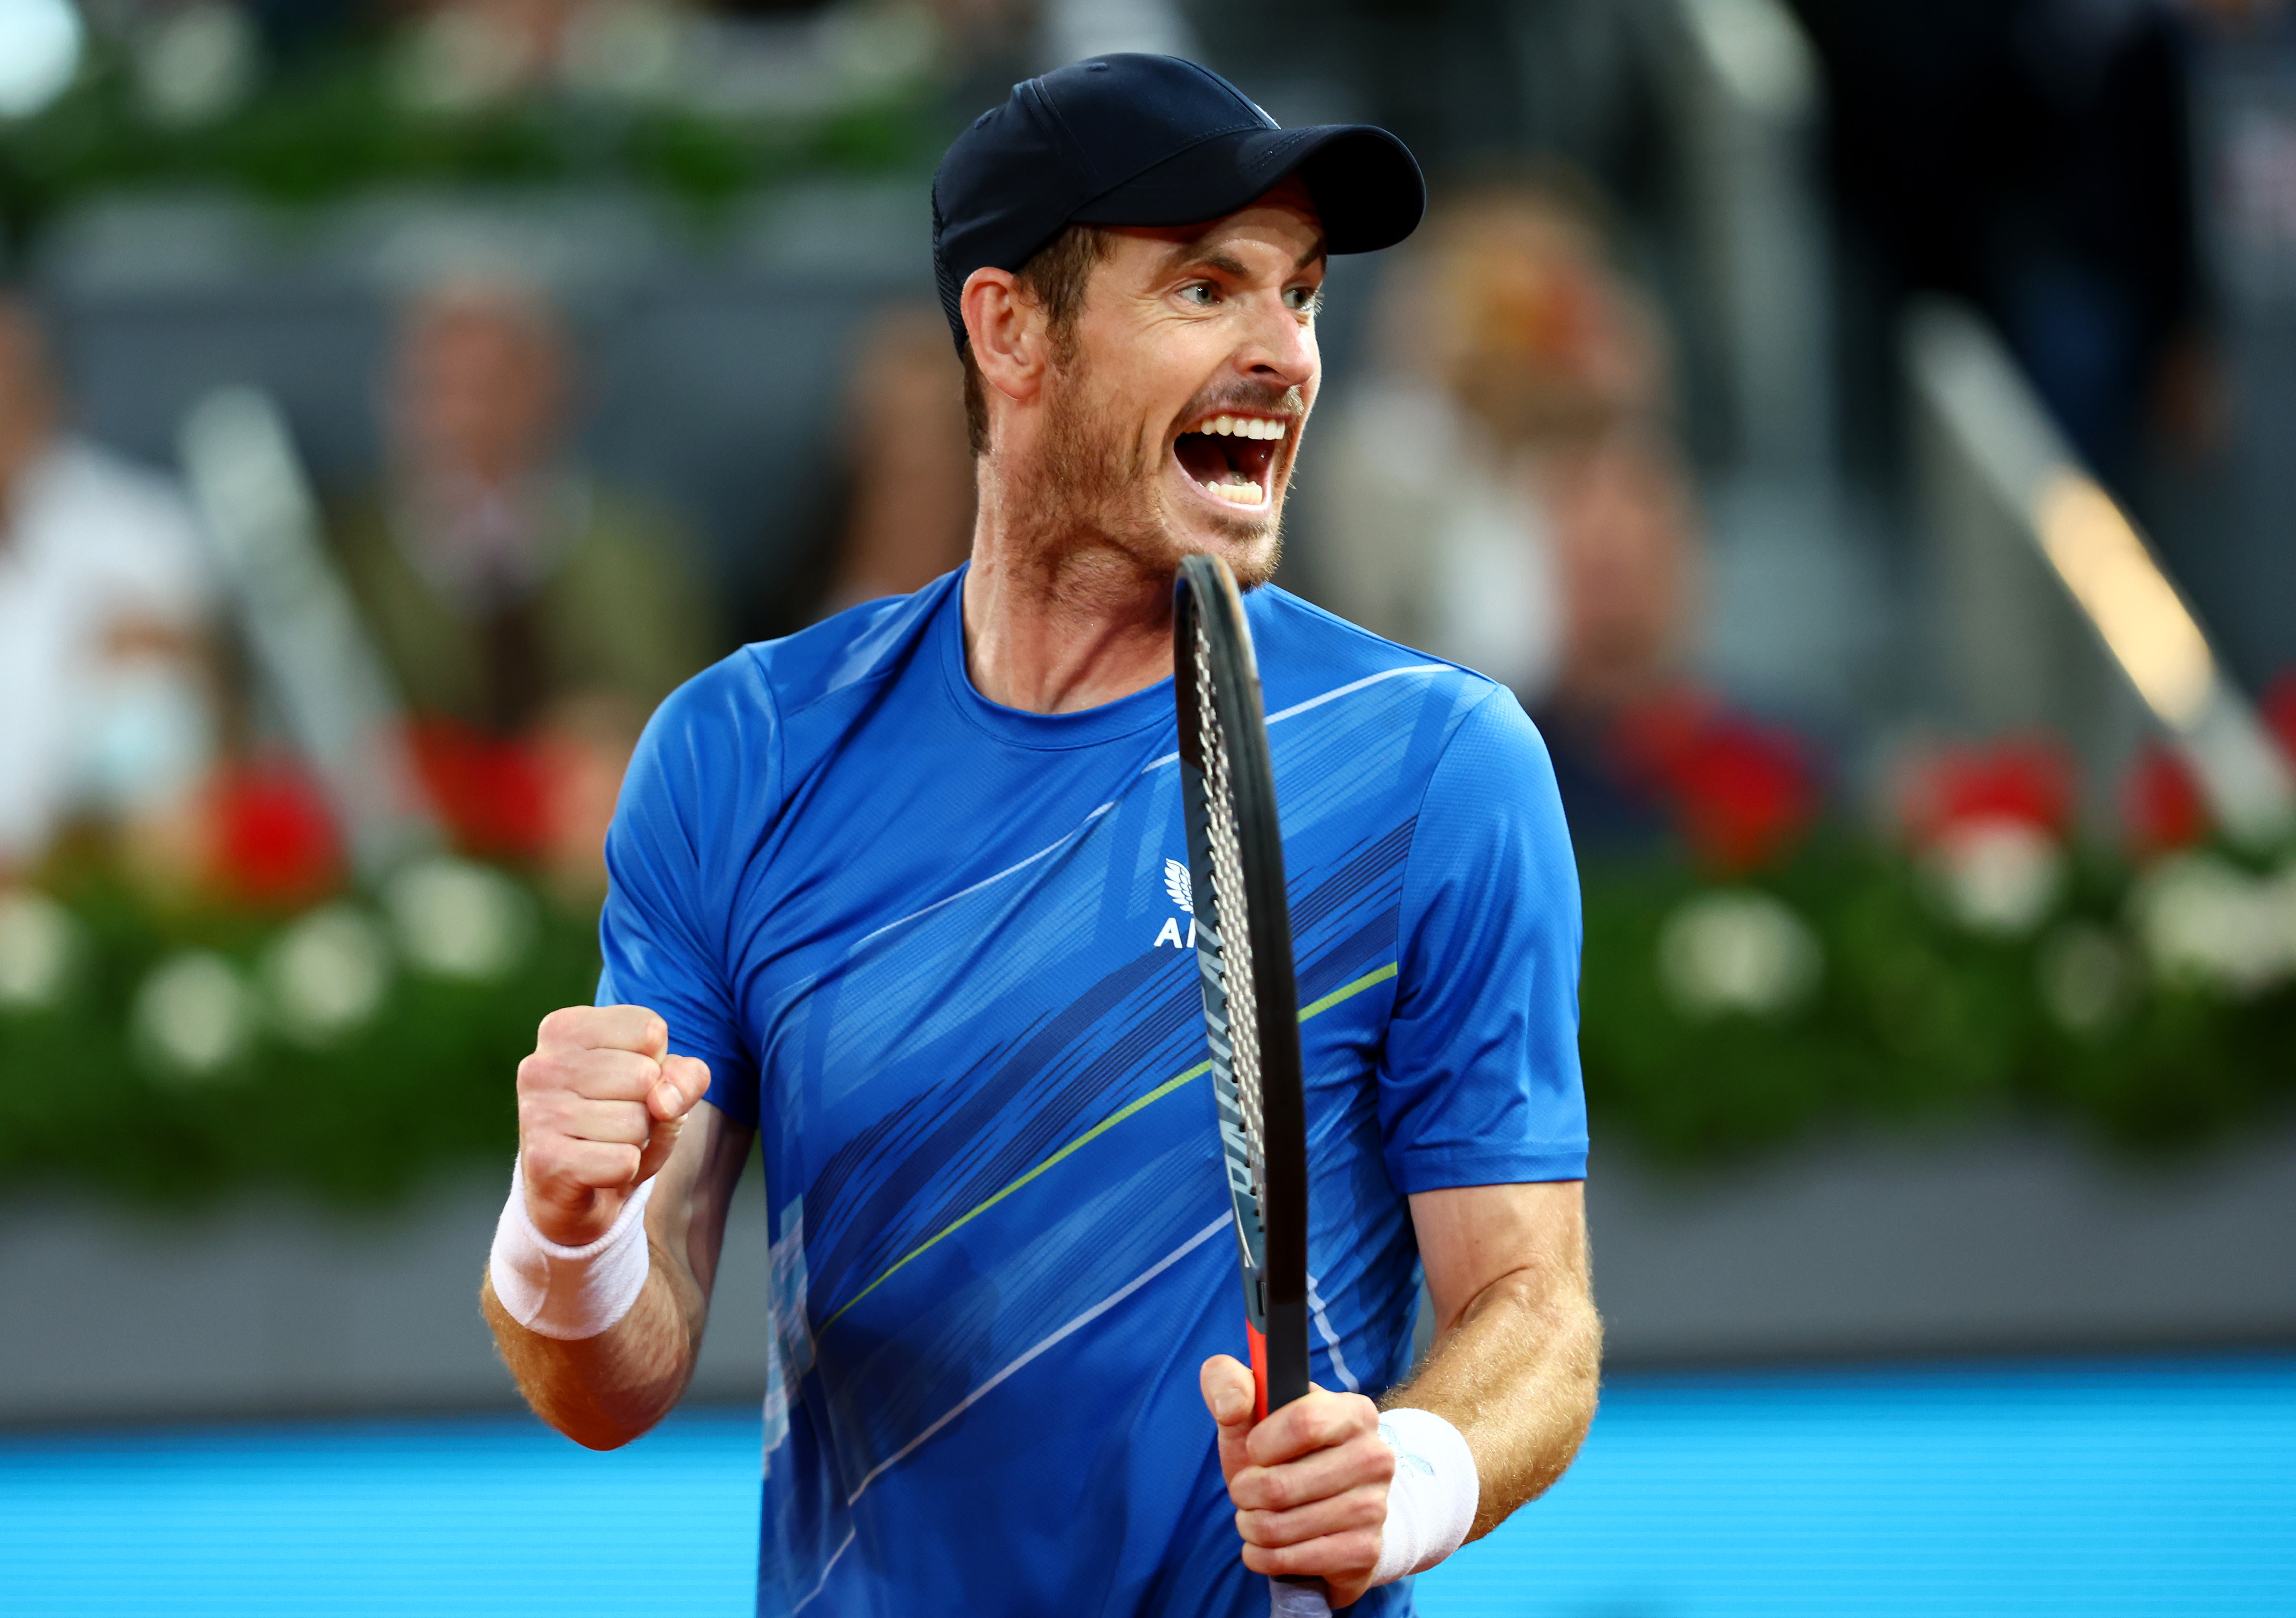 Andy Murray wins first match on clay in five years, gives opponent Thiem some comeback advice